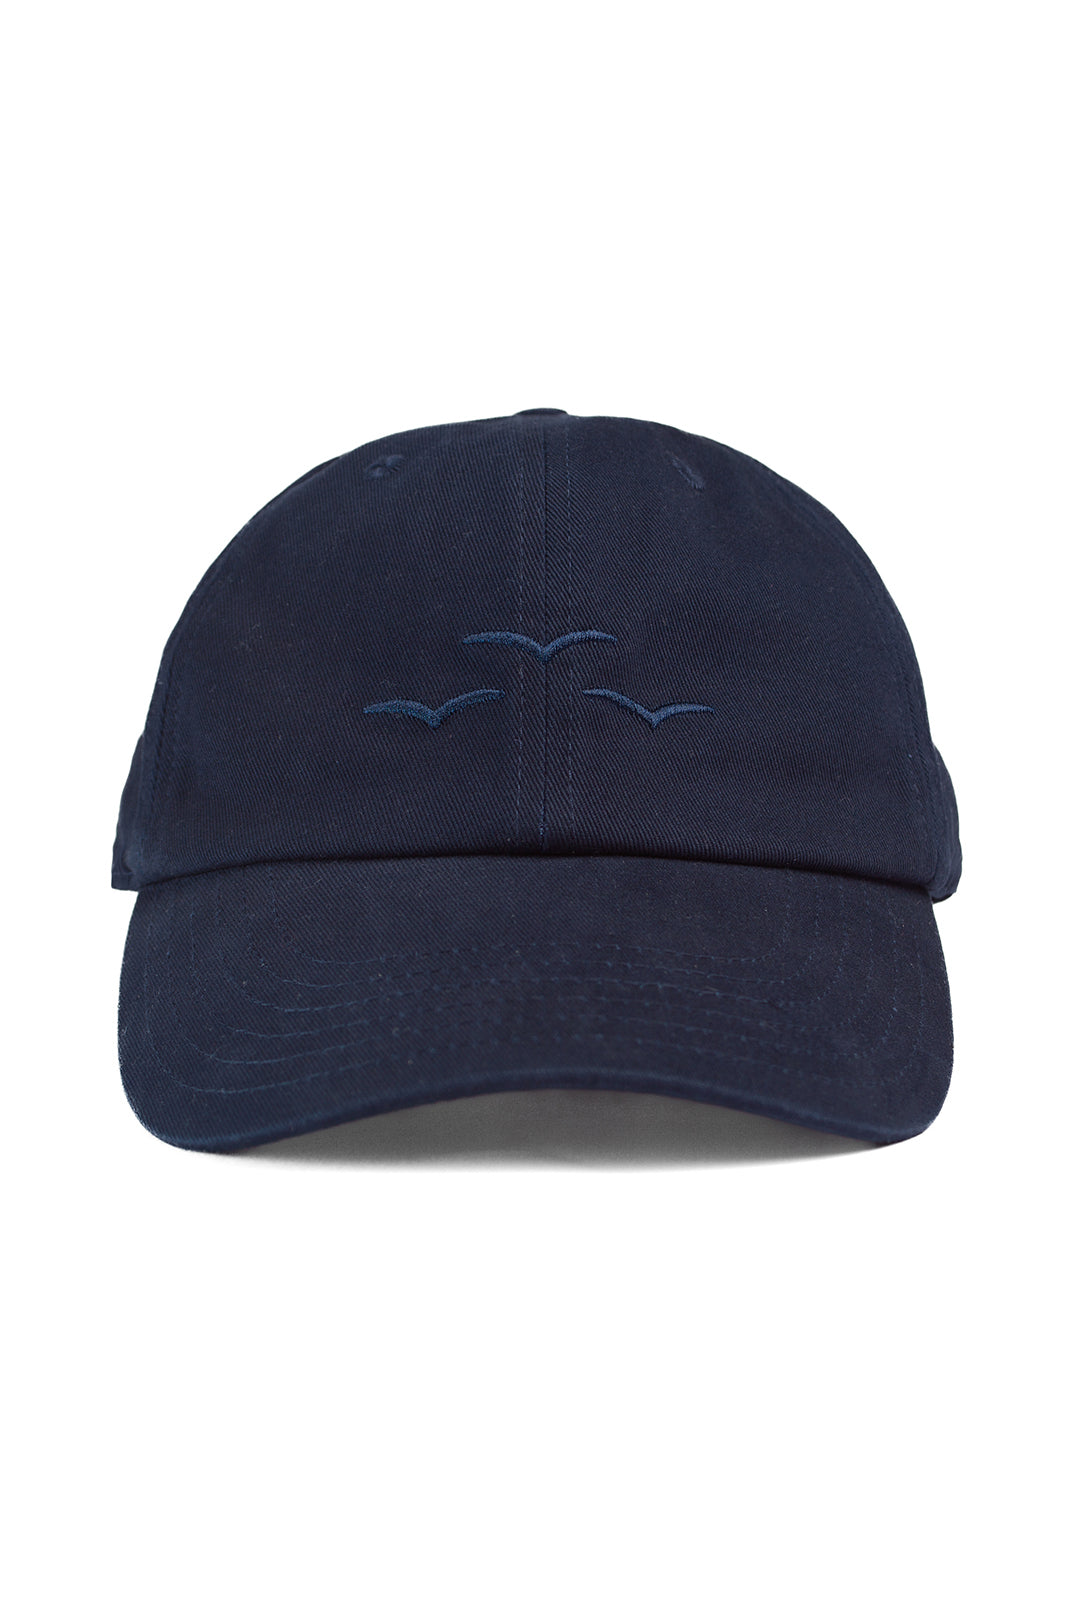 Washed cotton twill dad’s baseball cap in navy